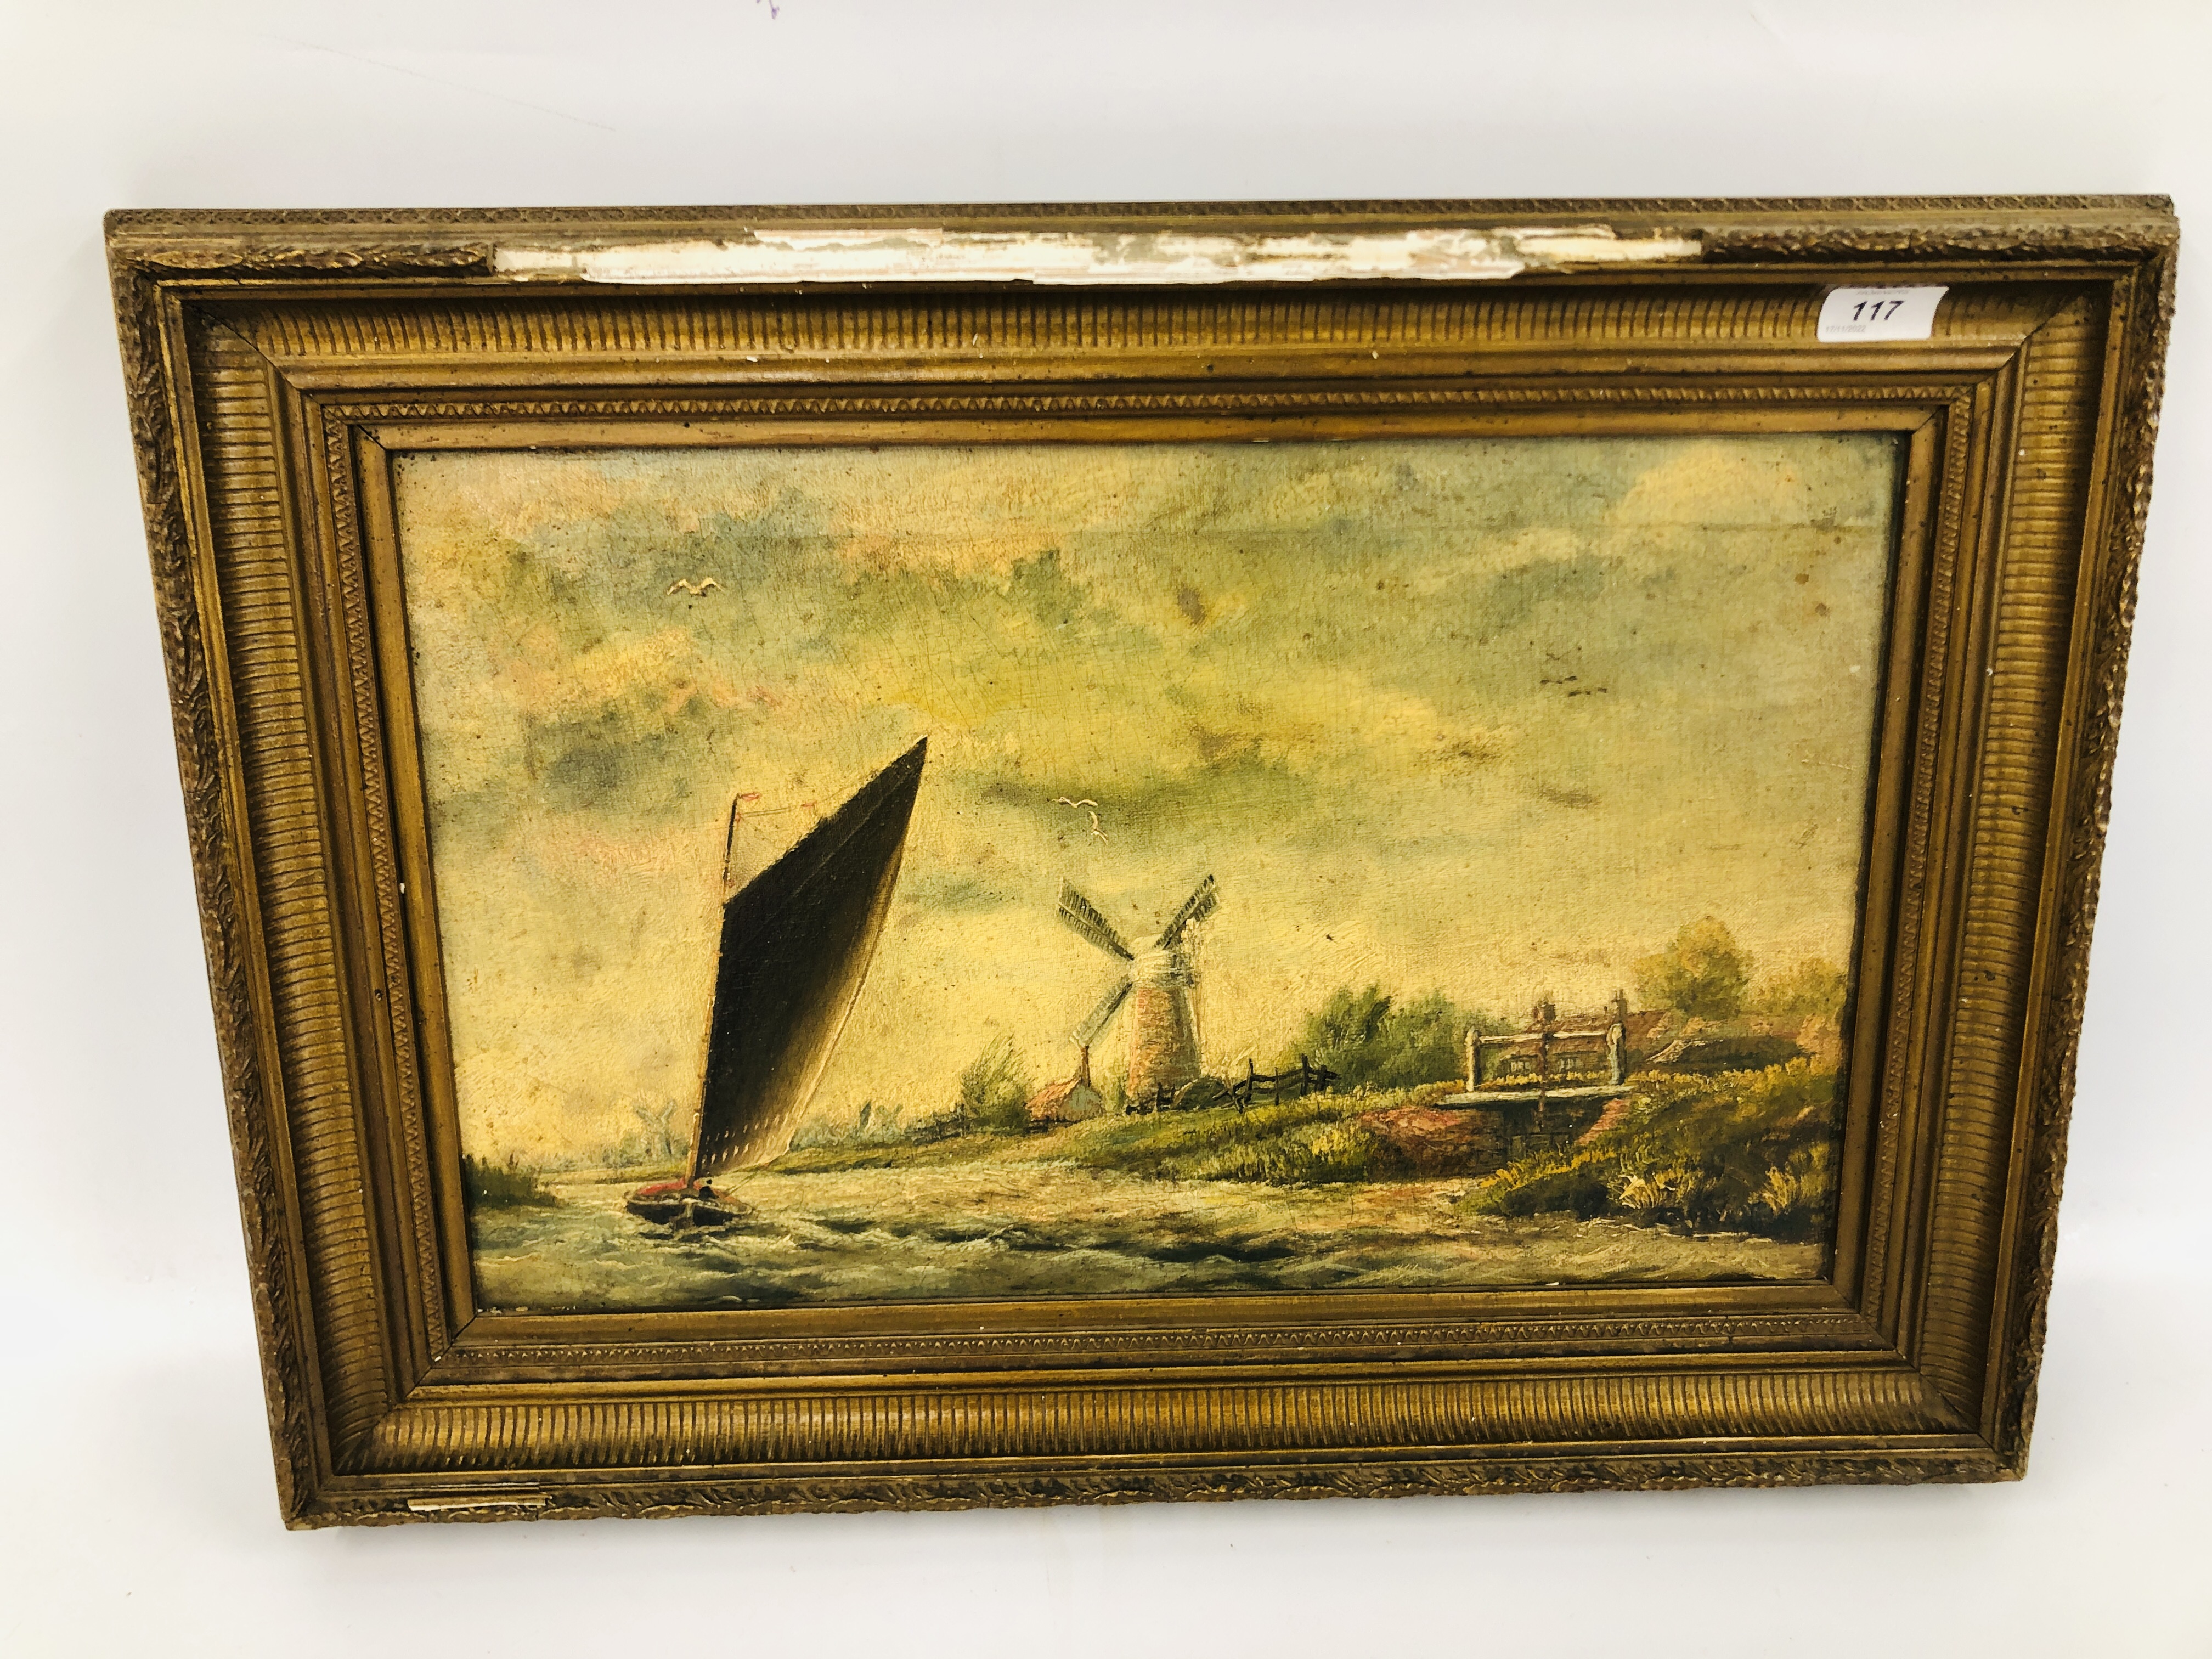 A GILT FRAMED OIL ON CANVAS DEPICTING SAILING BOAT ON THE RIVER PASSING A WINDMILL BEARING